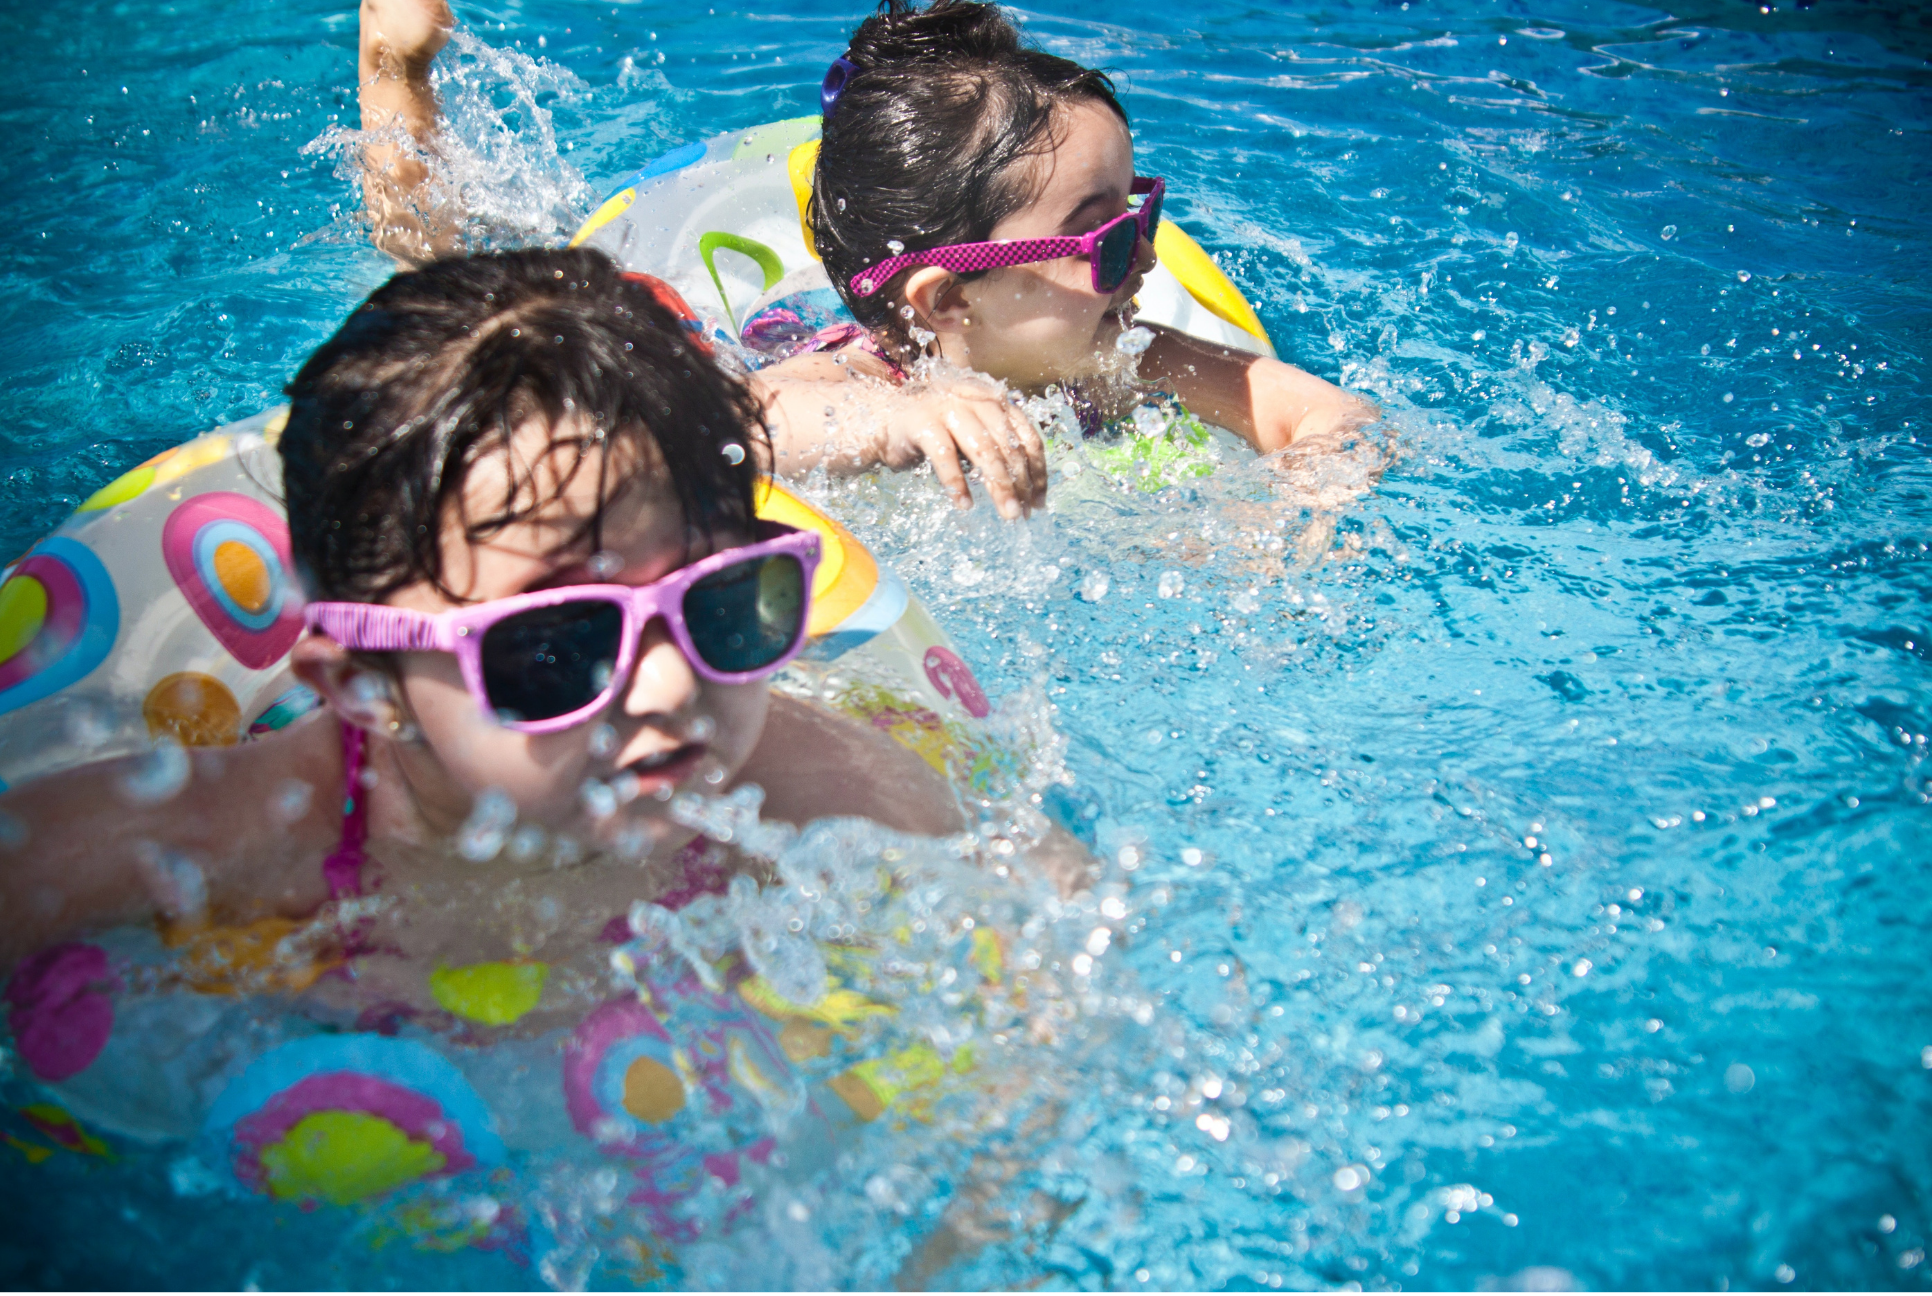 5 Fun Activities to Keep Your Kids Busy This Summer